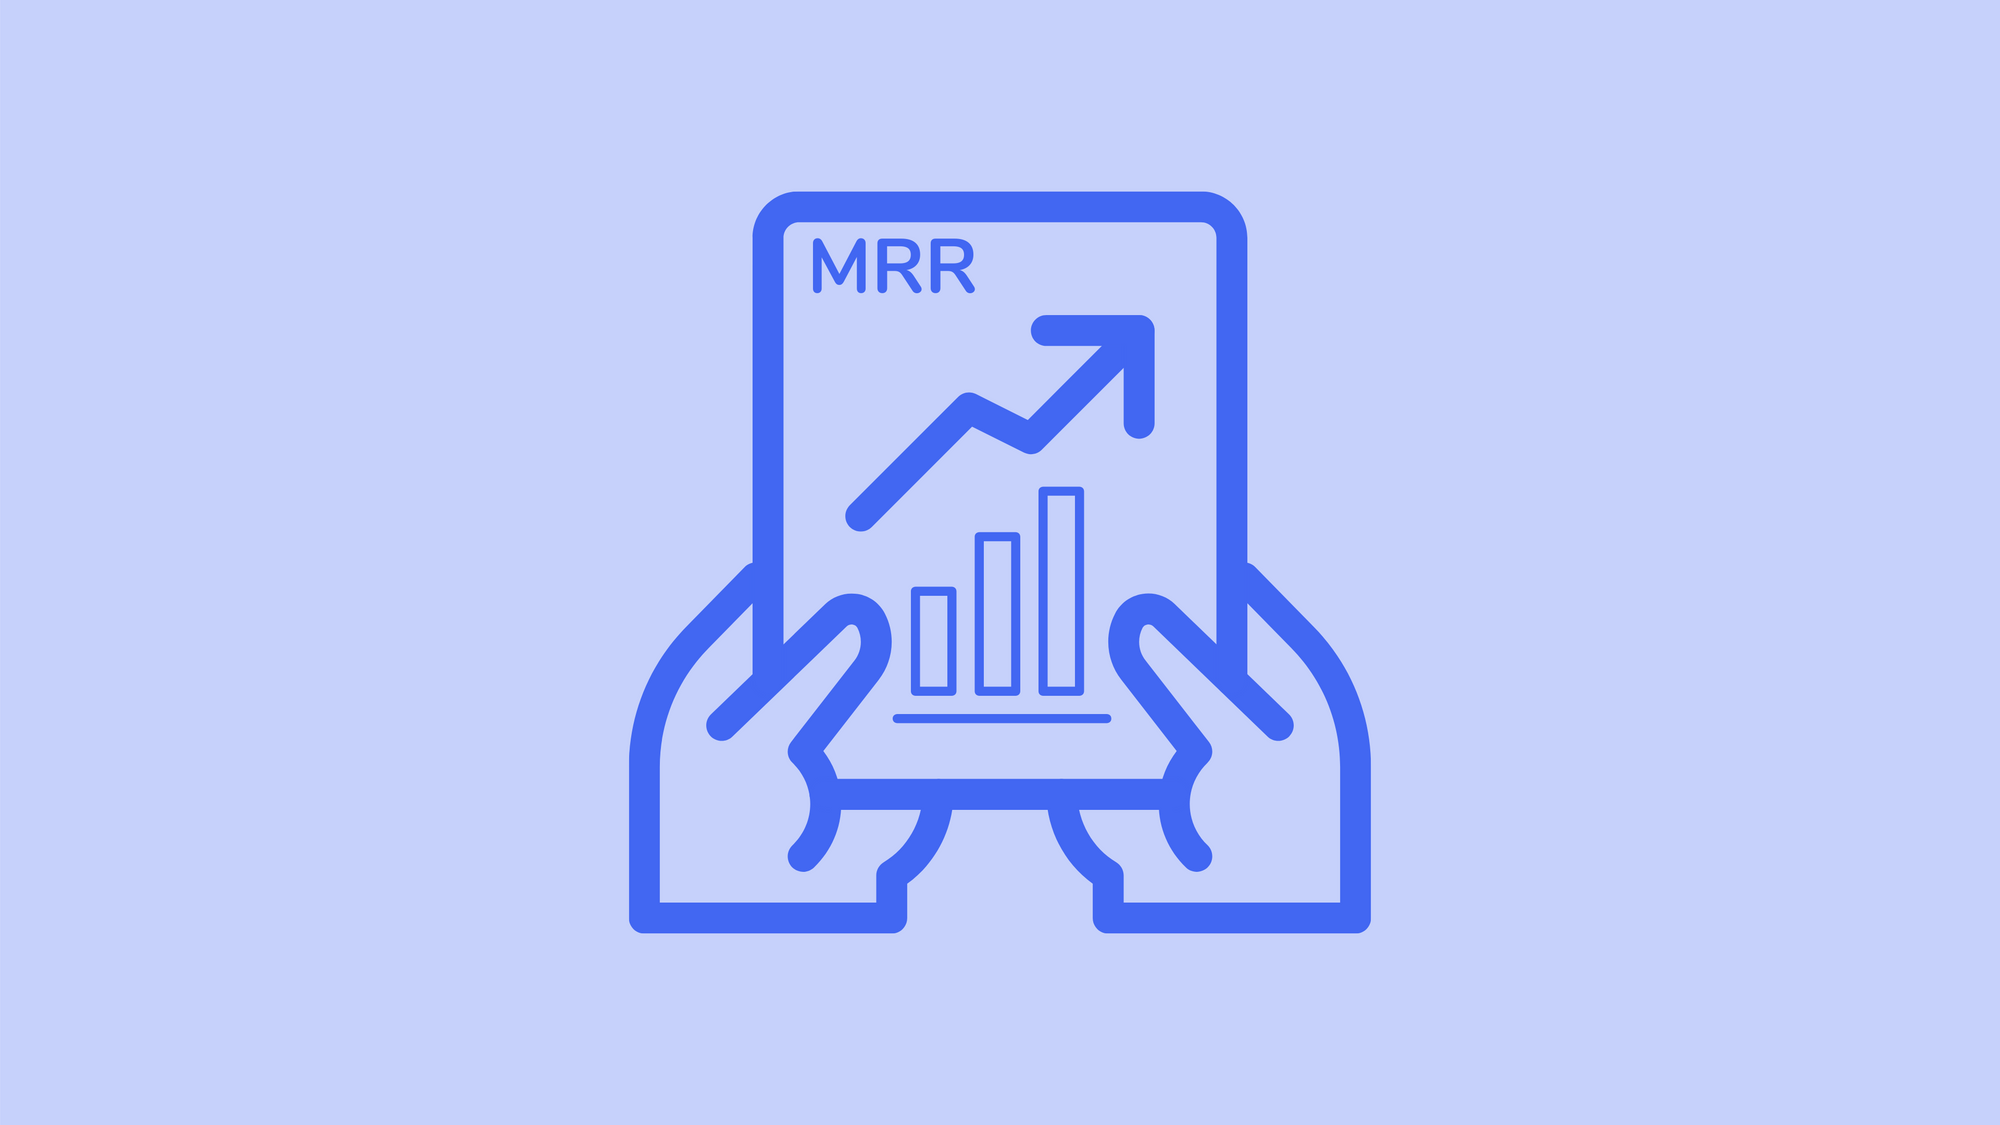 MRR: The most important indicator for SaaS